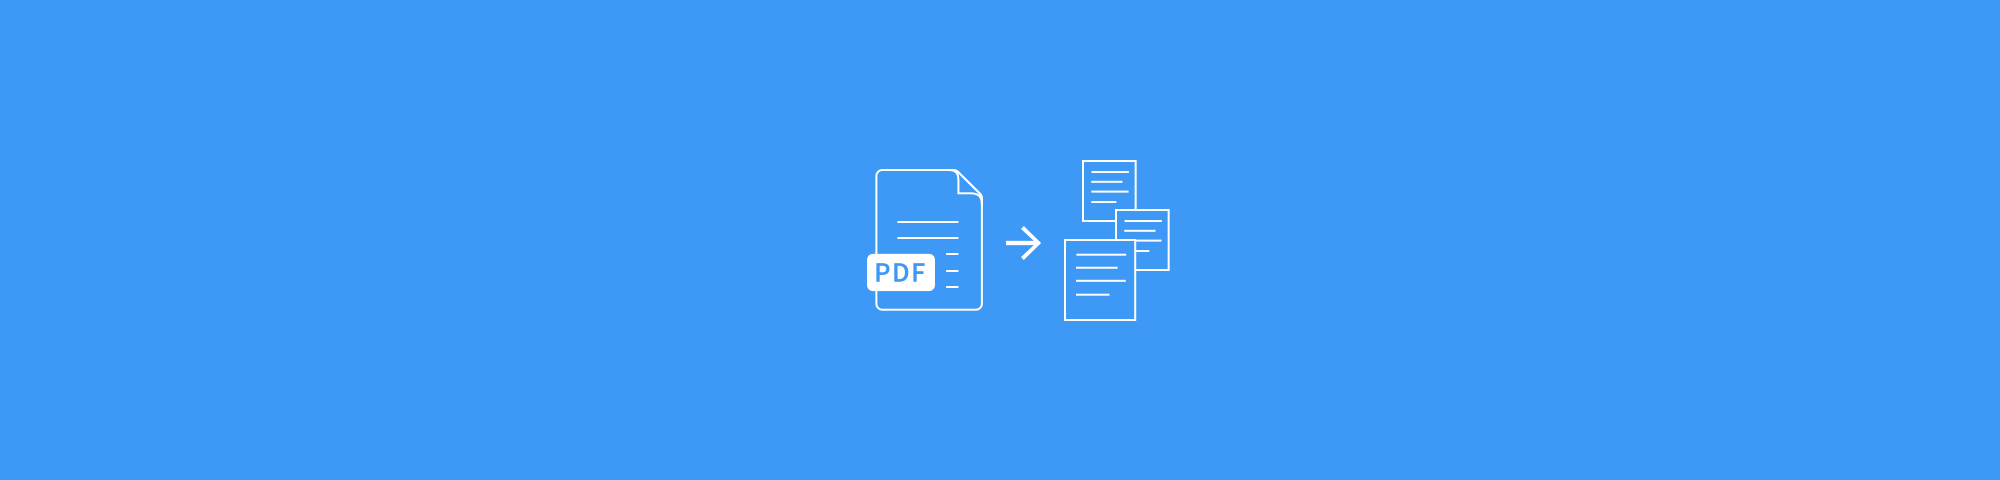 blog-banner: pdf-to-text-free-online-tool-to-convert-pdf-to-txt@2x